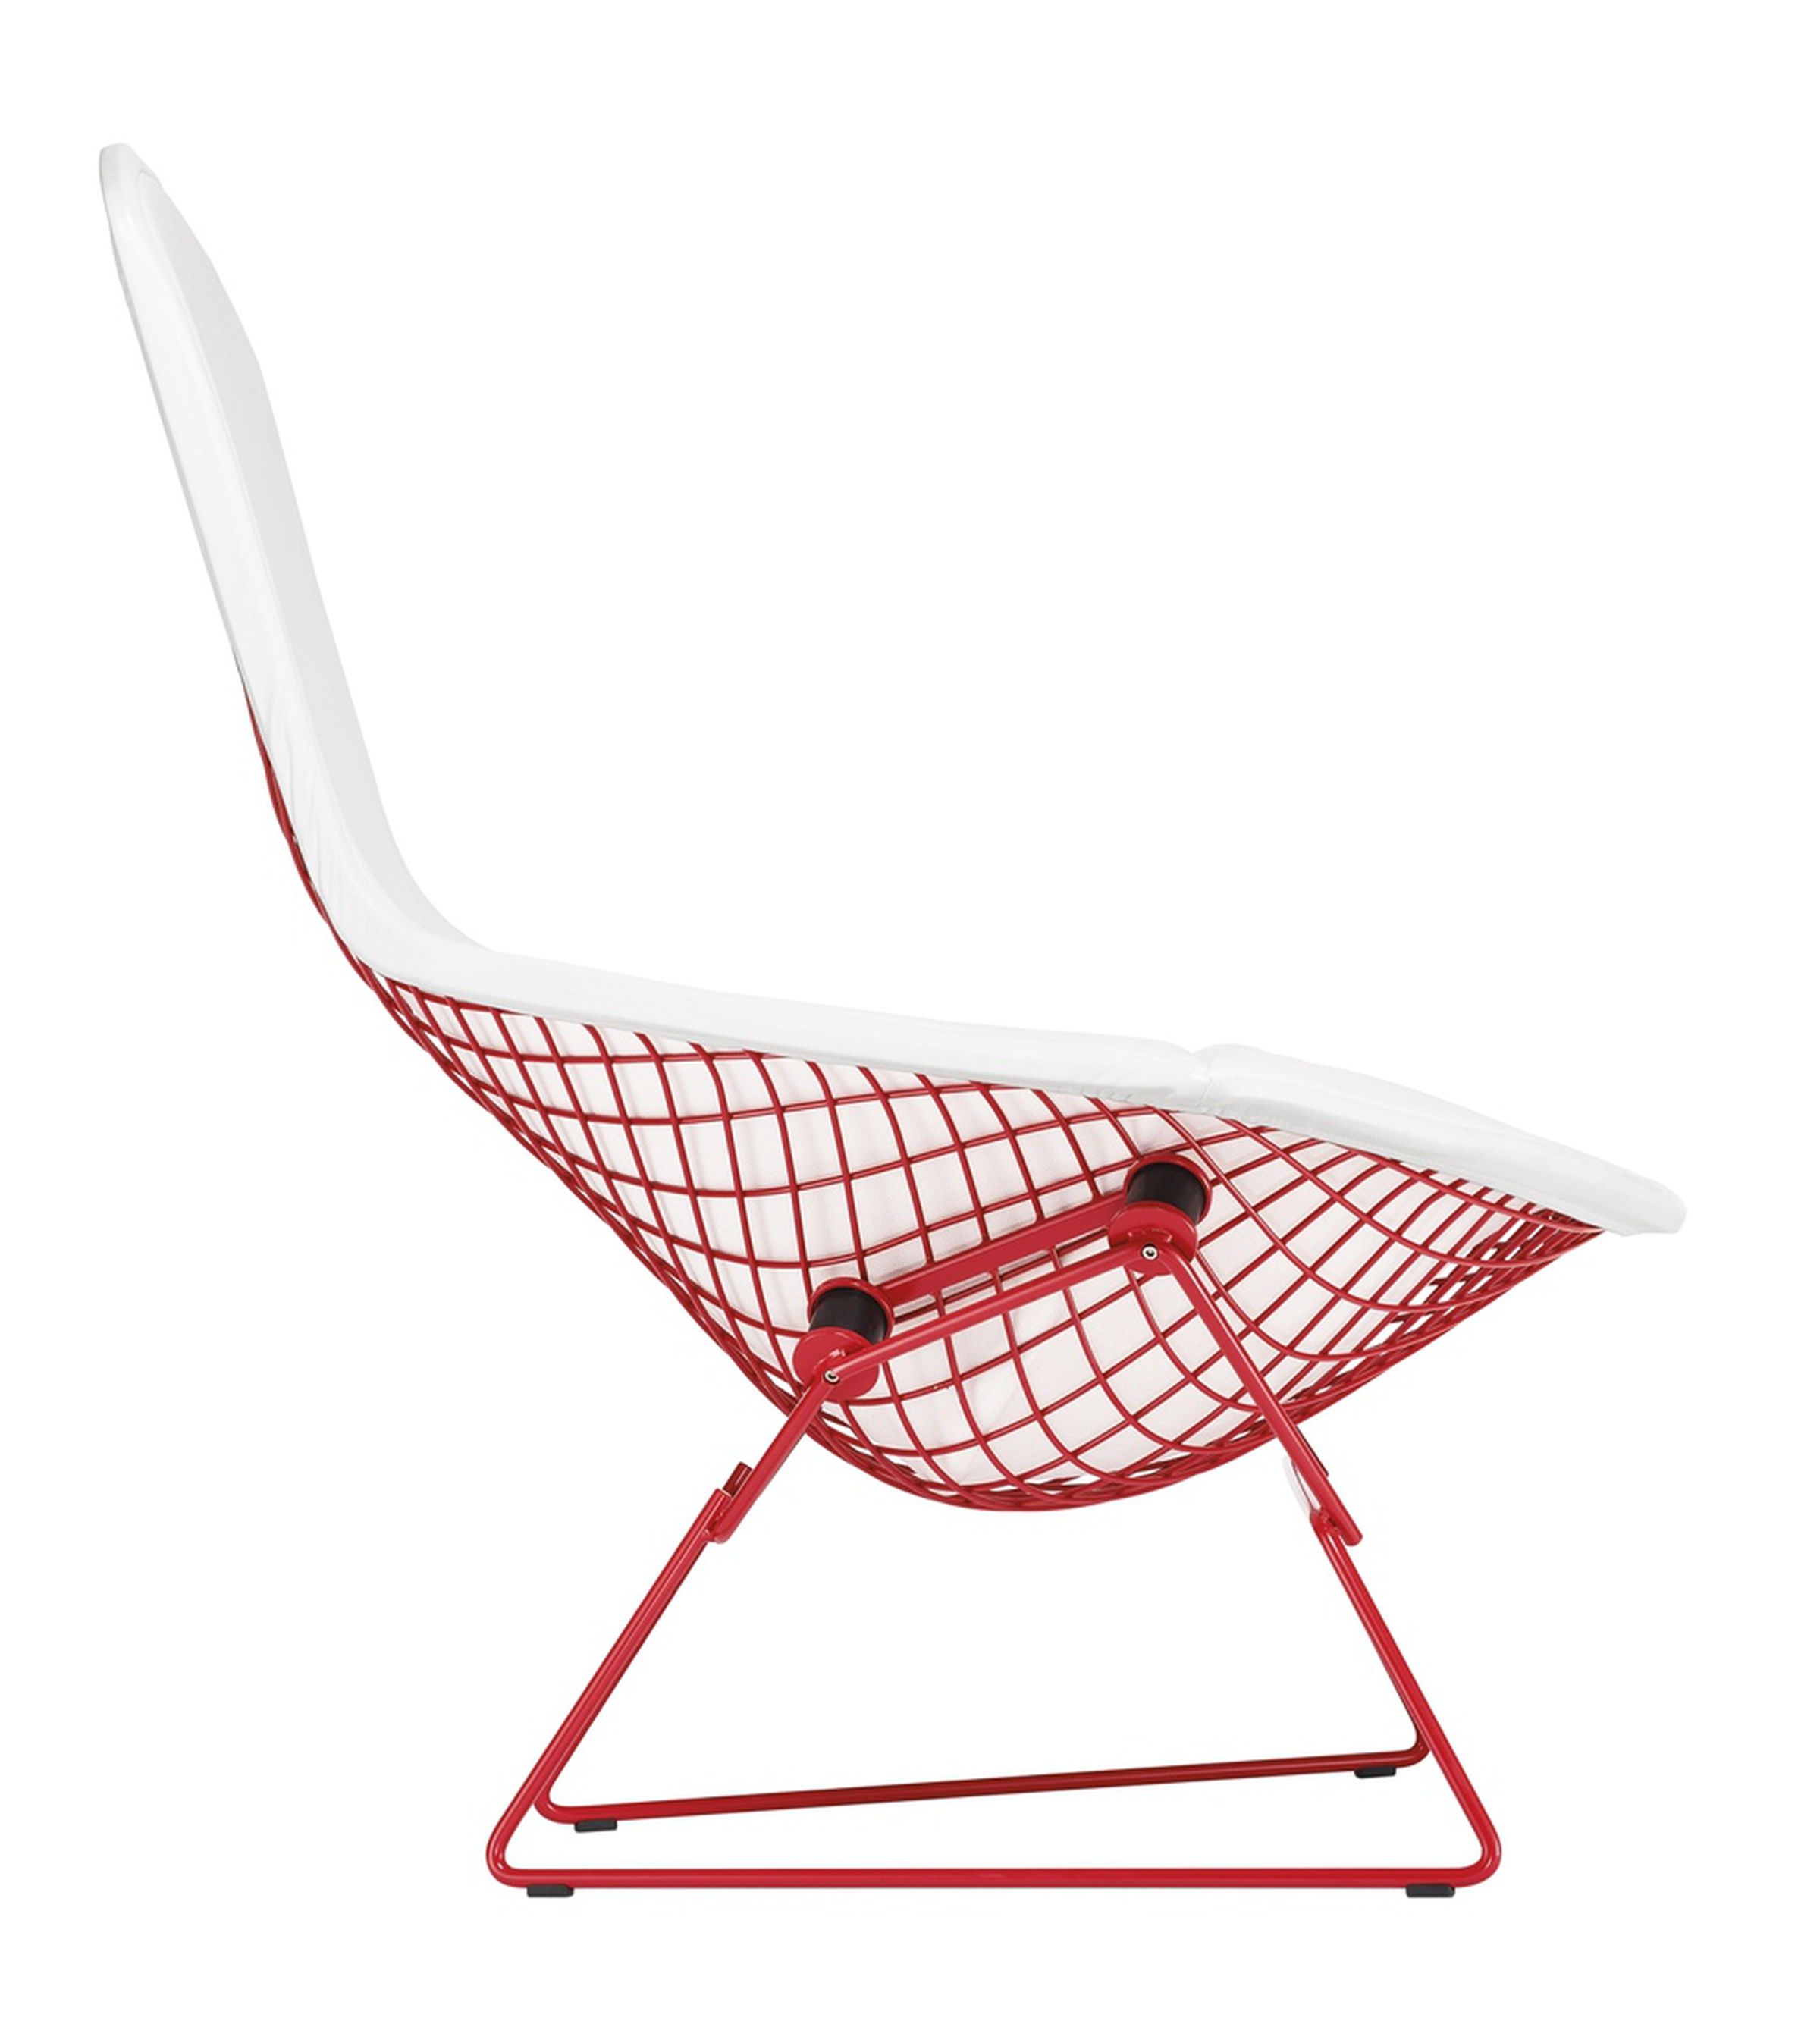 Jony Ive and Marc Newson's designed and customized items for Red